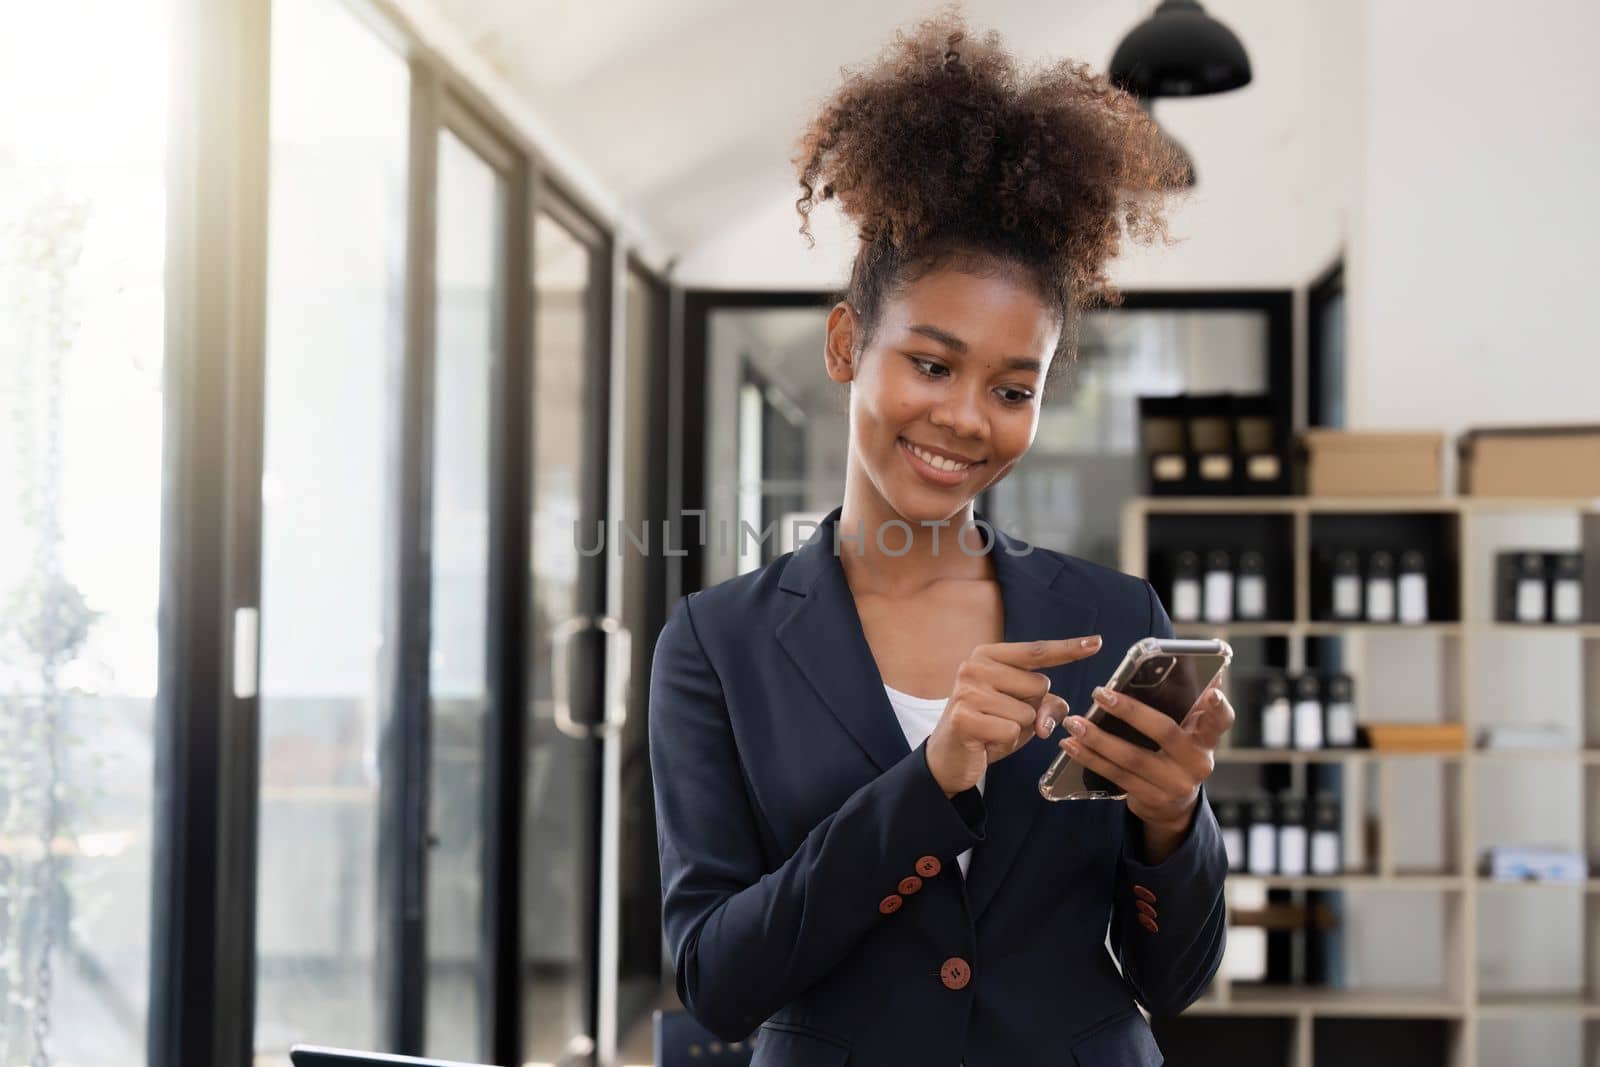 Image of young woman holding cellphone while working in office.